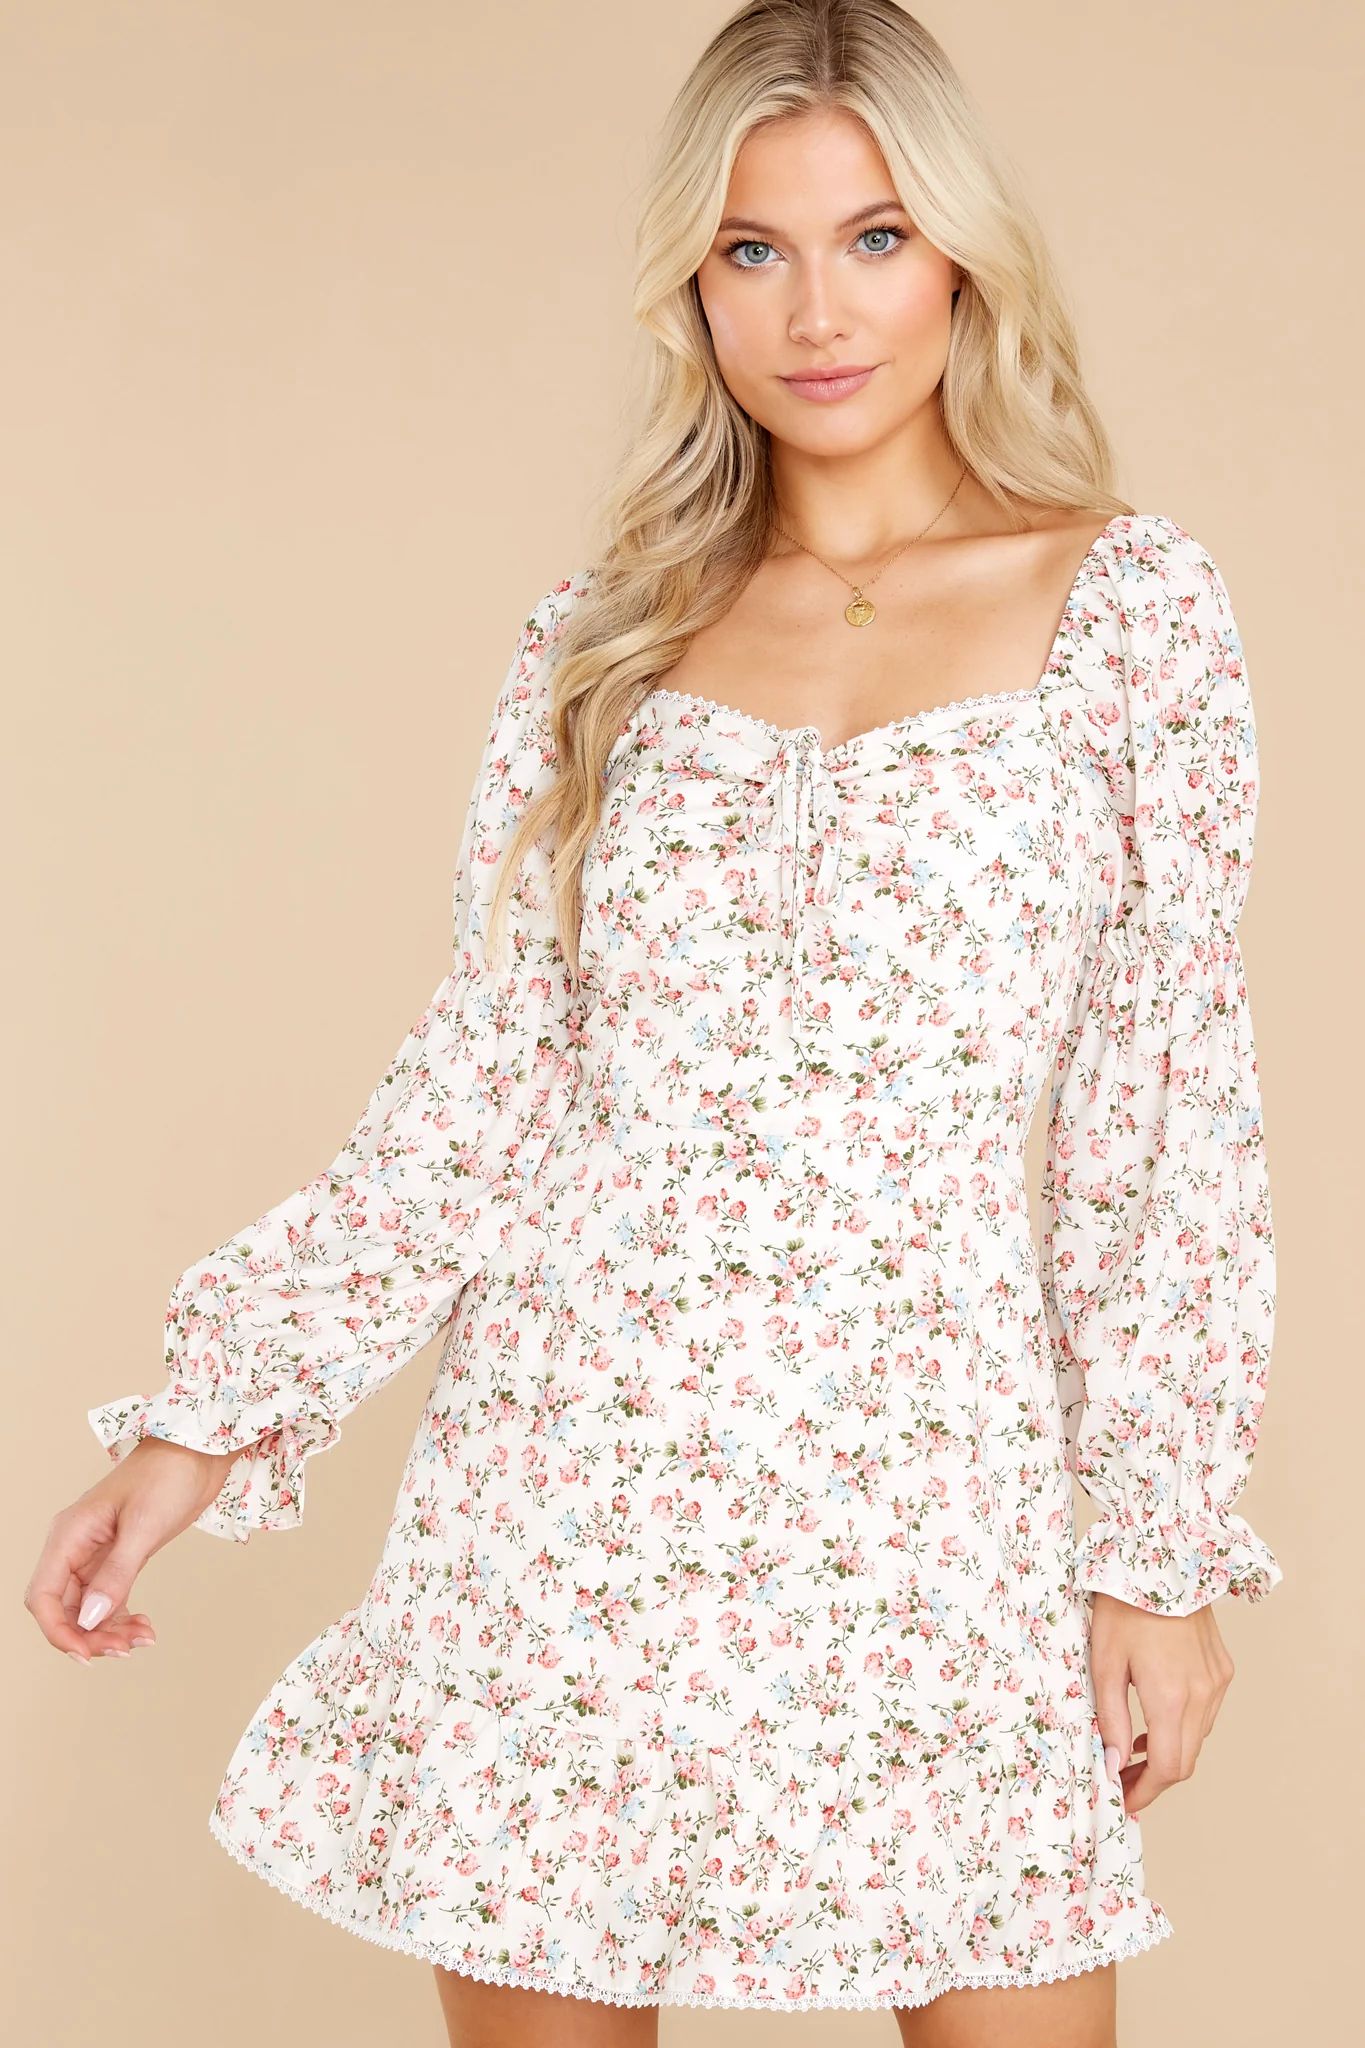 Blooming Days White Floral Print Dress | Red Dress 